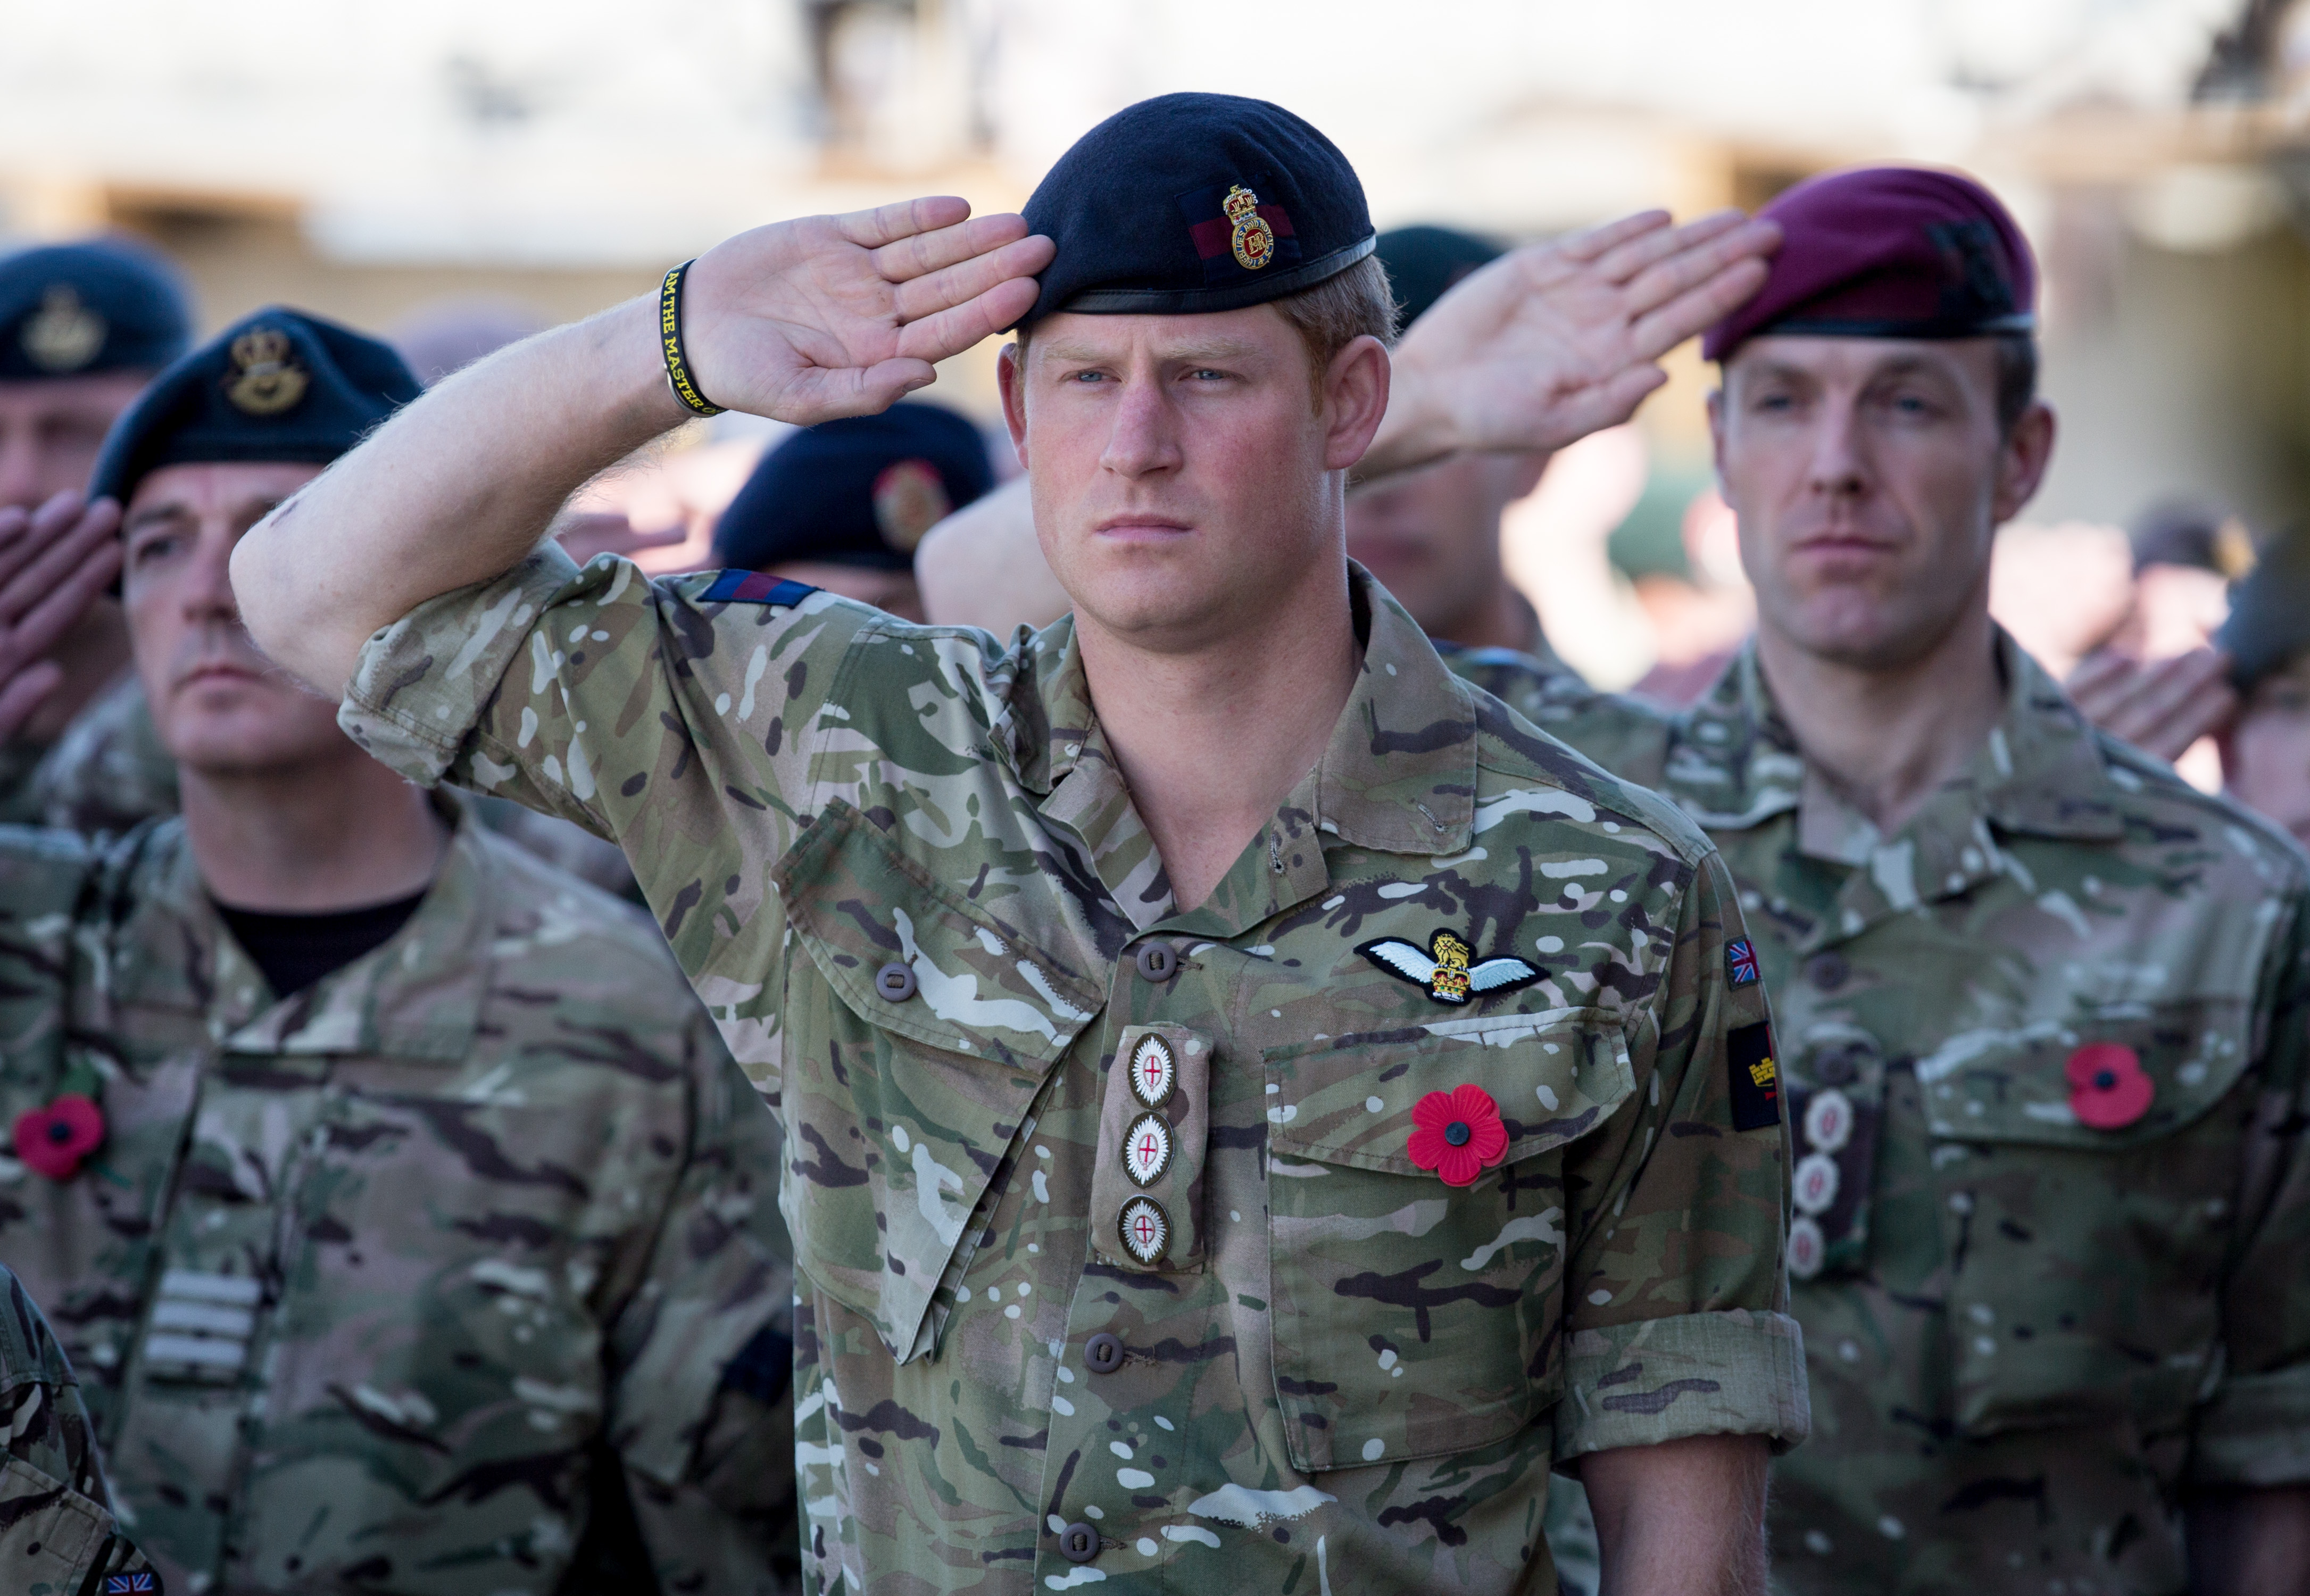 Prince Harry salutes as the Last Post is played during a Remembrance Sunday service at Kandahar Airfield on November 9, 2014 in Kandahar, Afghanistan. | Source: Getty Images